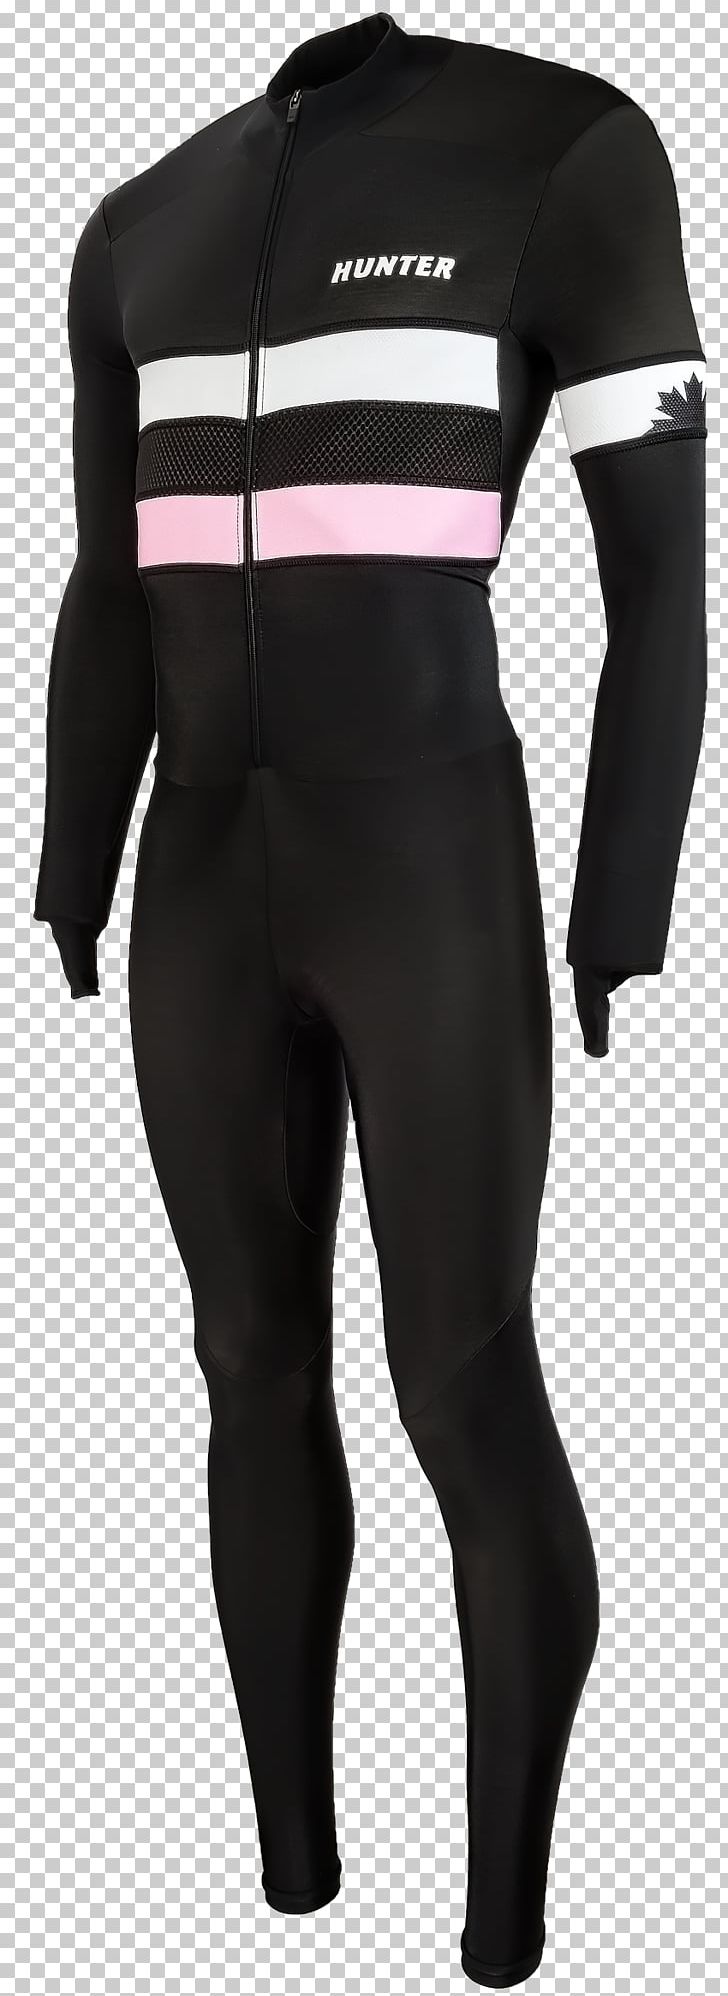 Schaatspak Raps BV Wetsuit Clothing Sleeve PNG, Clipart, Clothing, Ice Skating, Joint, Koole Sport, Miscellaneous Free PNG Download